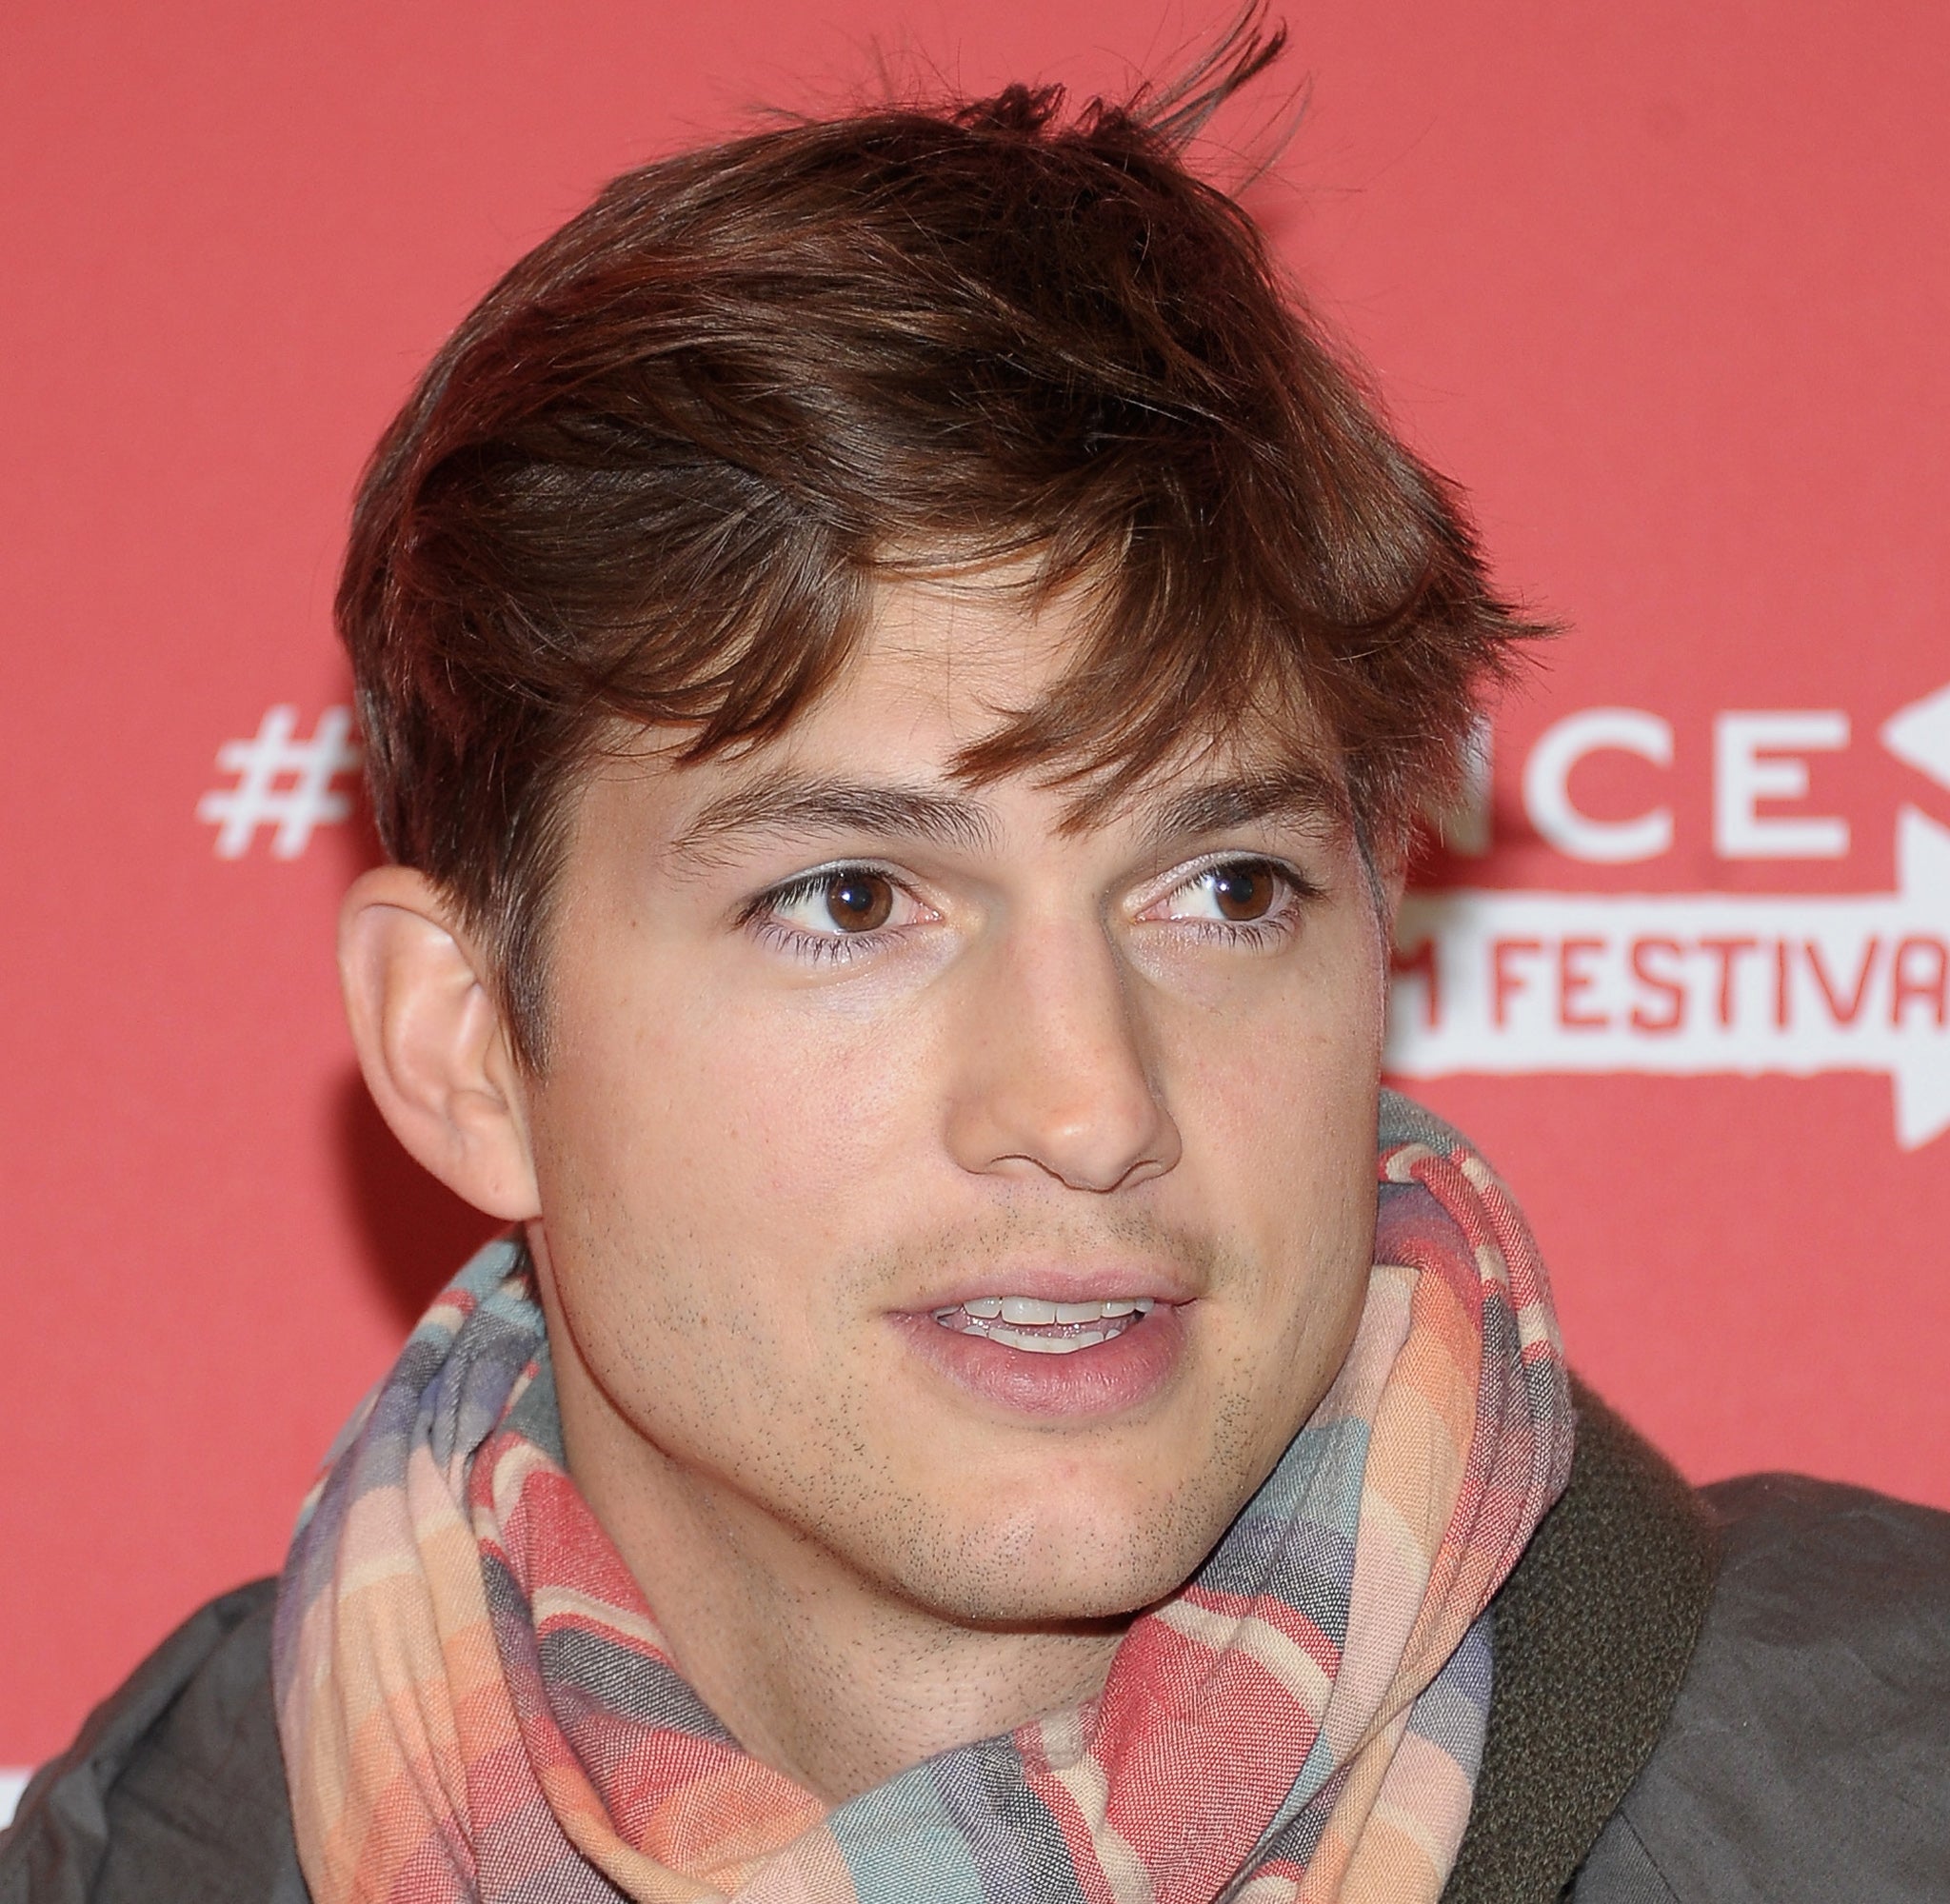 Ashton Kutcher has failed to leave a tip for an £8 haircut, according to a barber in Somerset